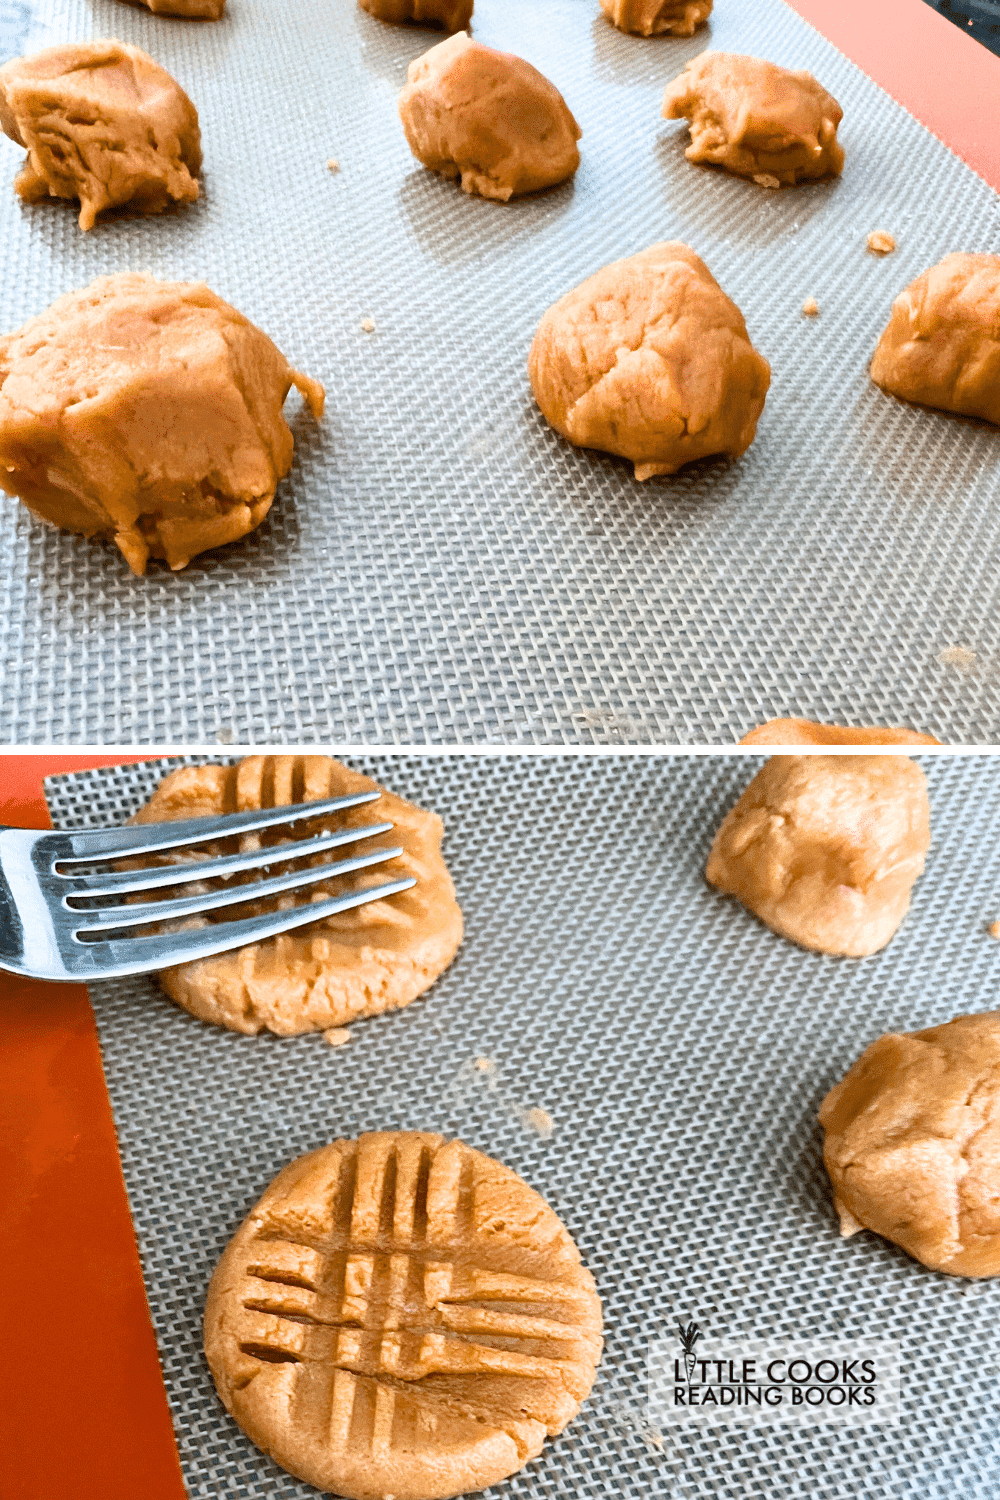 Tips for baking three ingredient peanut butter cookies - peanut butter cookie balls on a silicone baking mat and another picture of peanut butter cookies with a fork making a criss cross pattern on top of a cookie